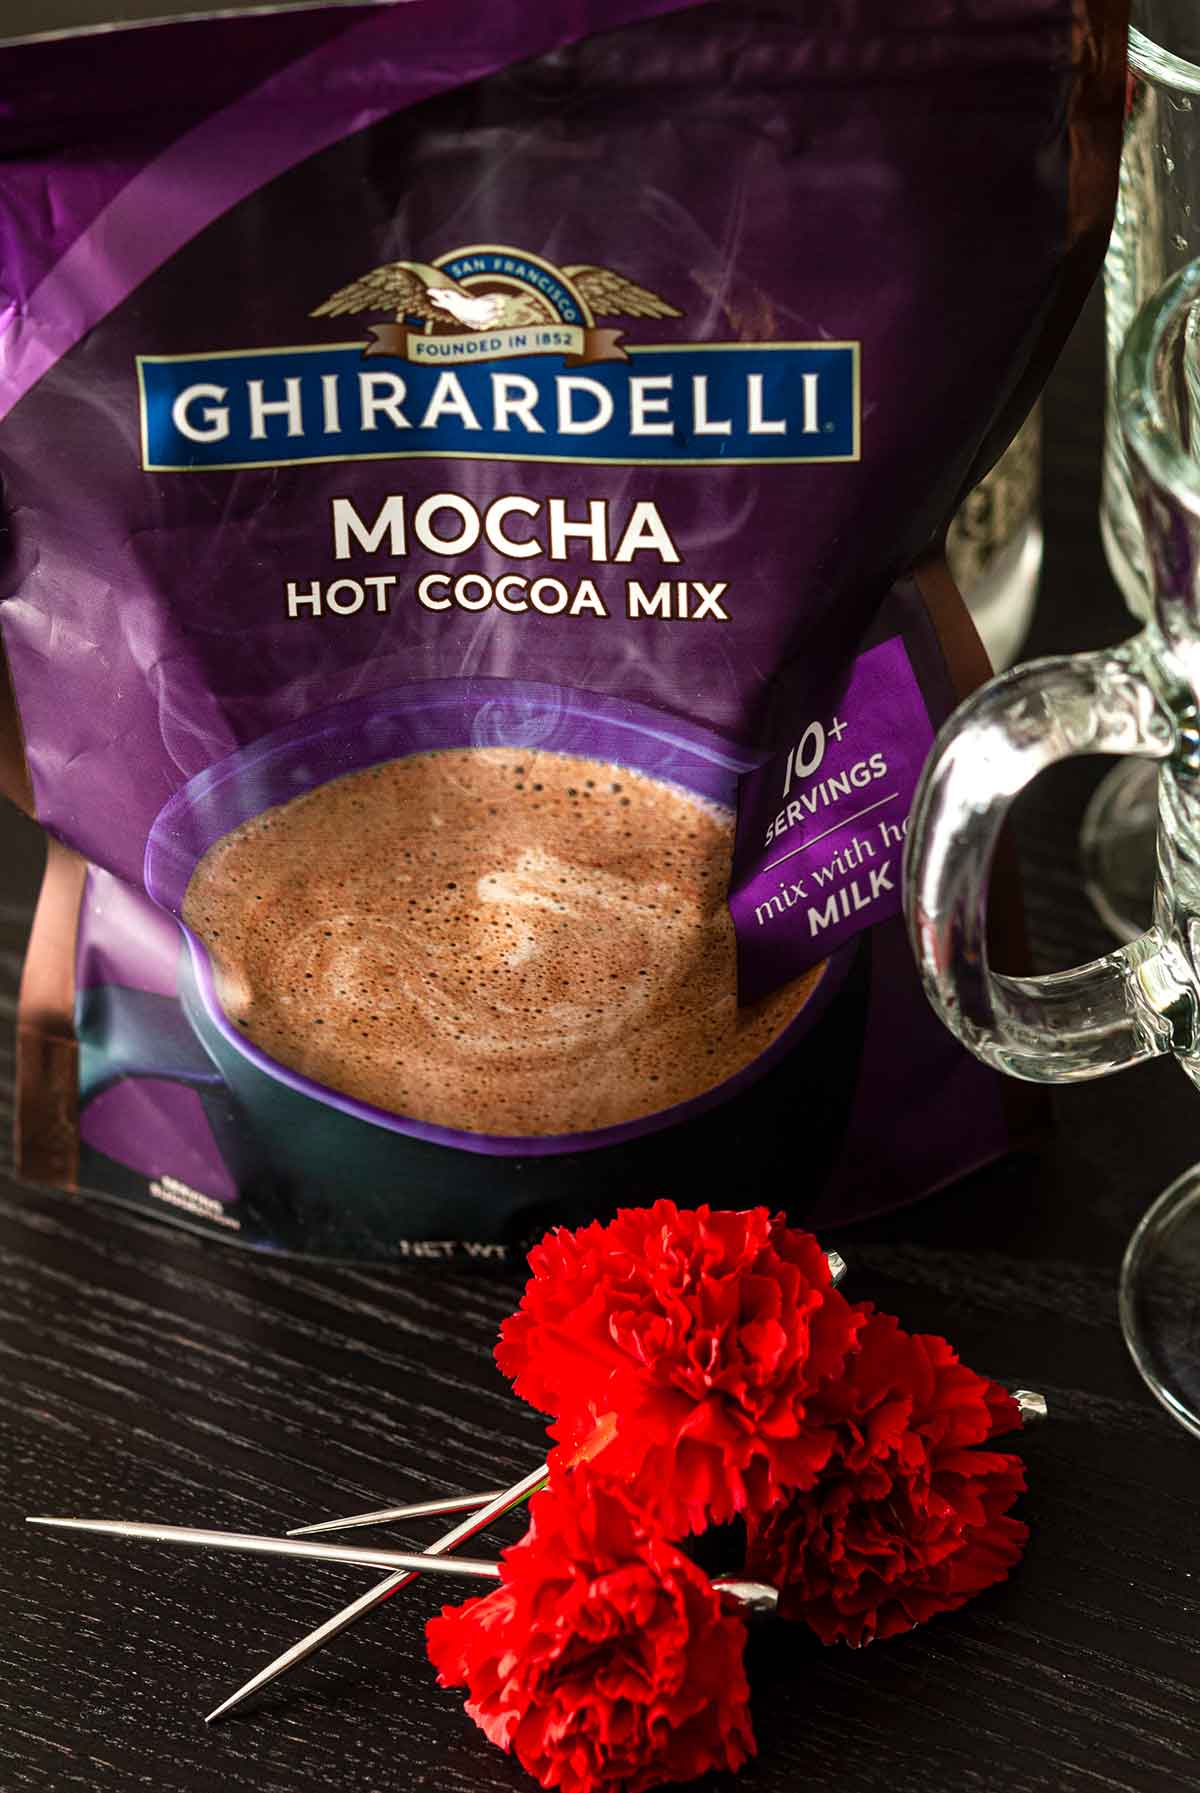 A bag of Ghiradelli mocha hot cocoa mix on a table behind 3 flower garnishes.